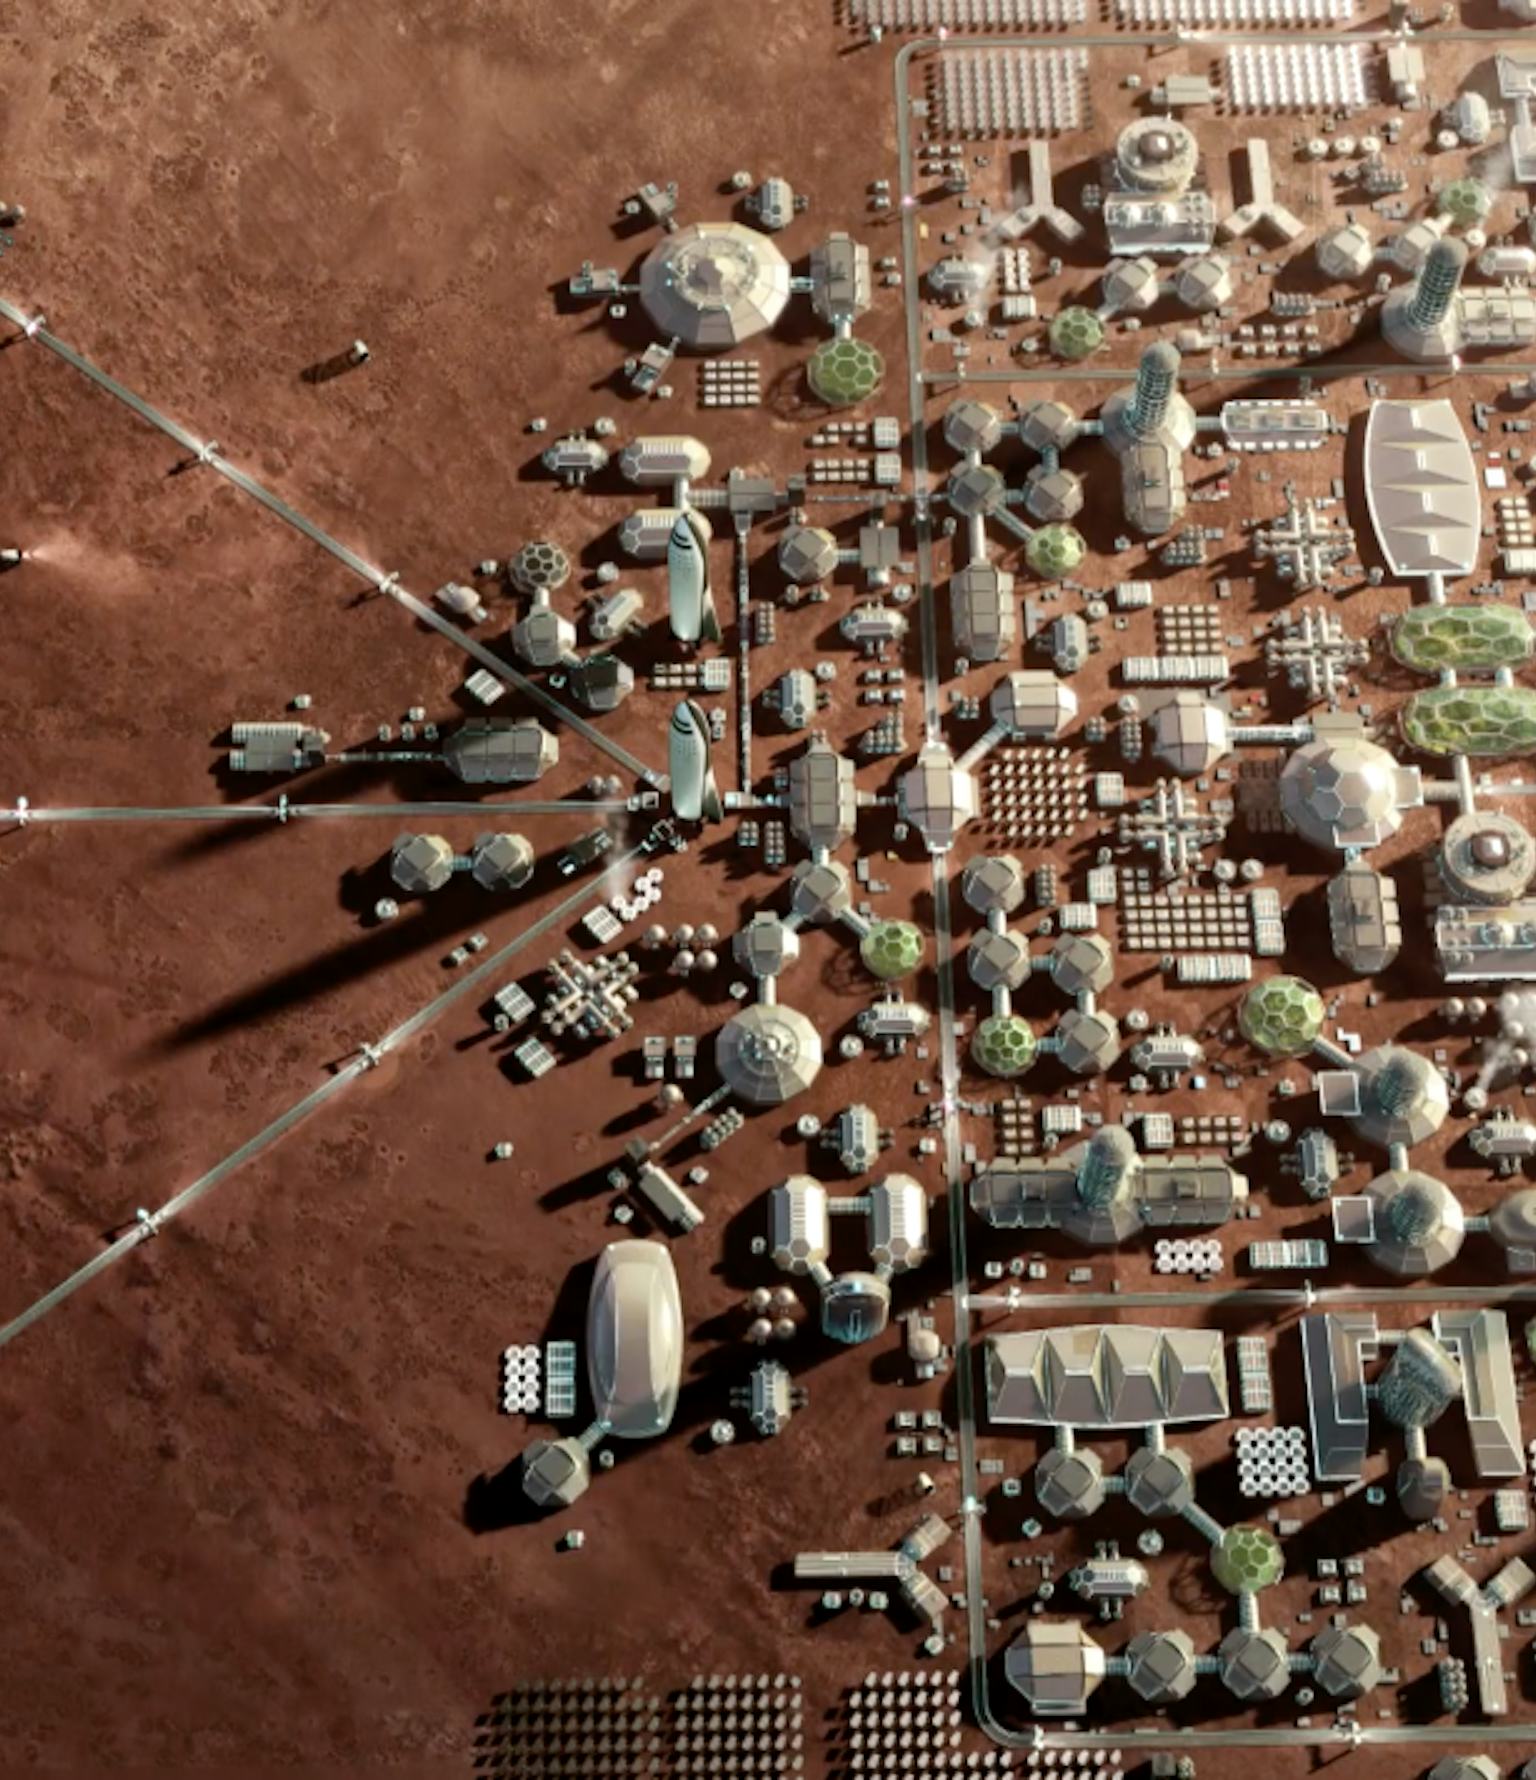 SpaceX Mars city: Elon Musk details 1 test its success depends on